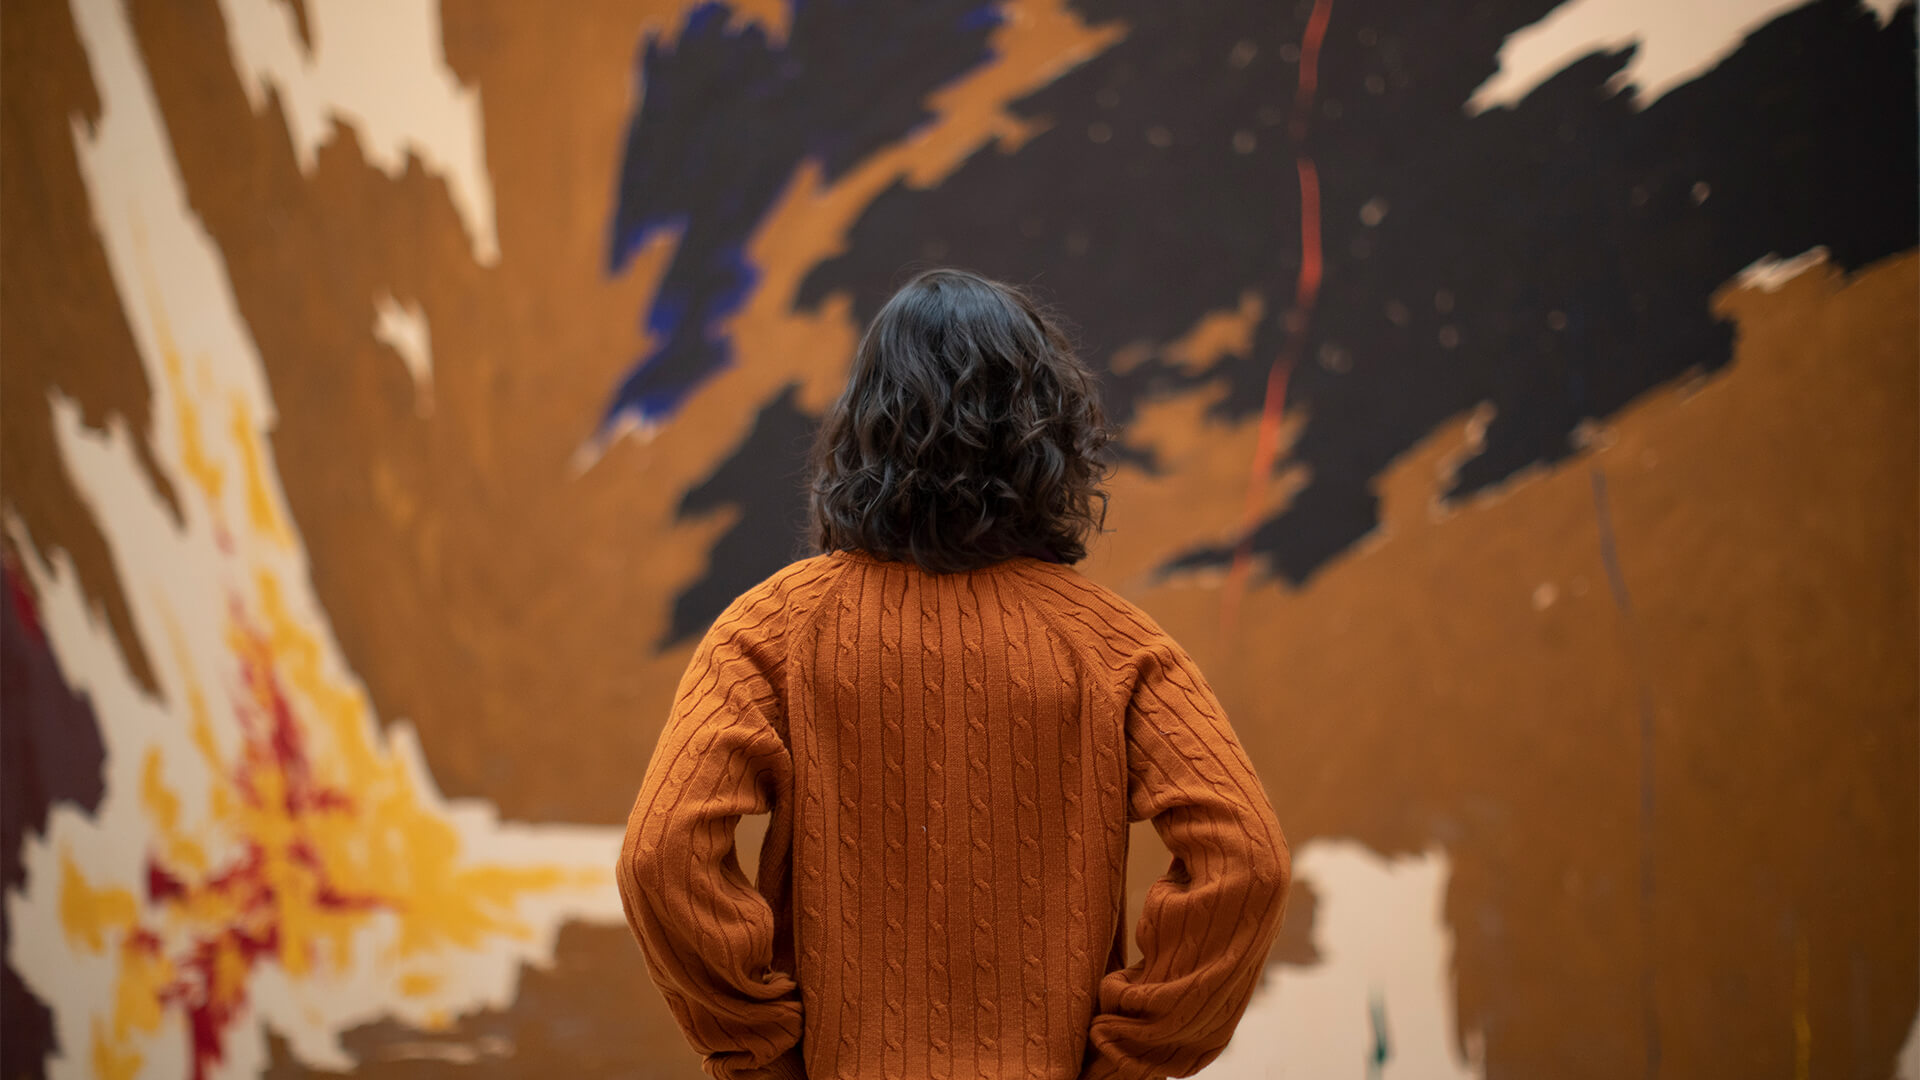 A woman in an orange sweater looks up a a large abstract painting by Clyfford Still